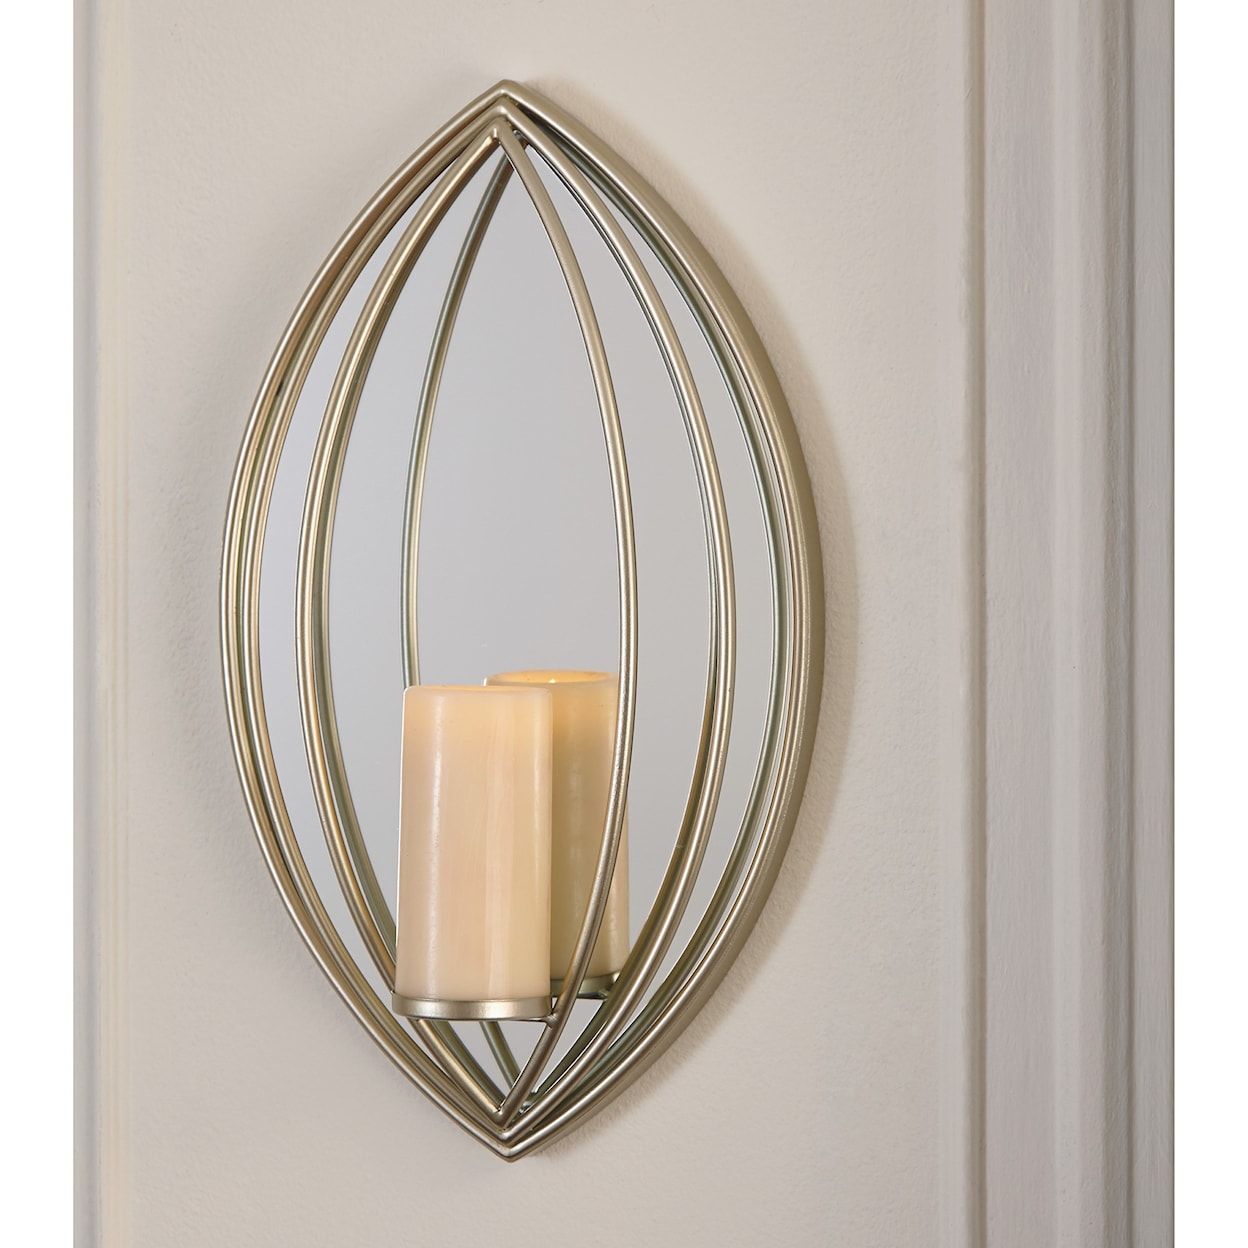 Benchcraft Accent Mirrors Donnica Silver Finish Wall Sconce